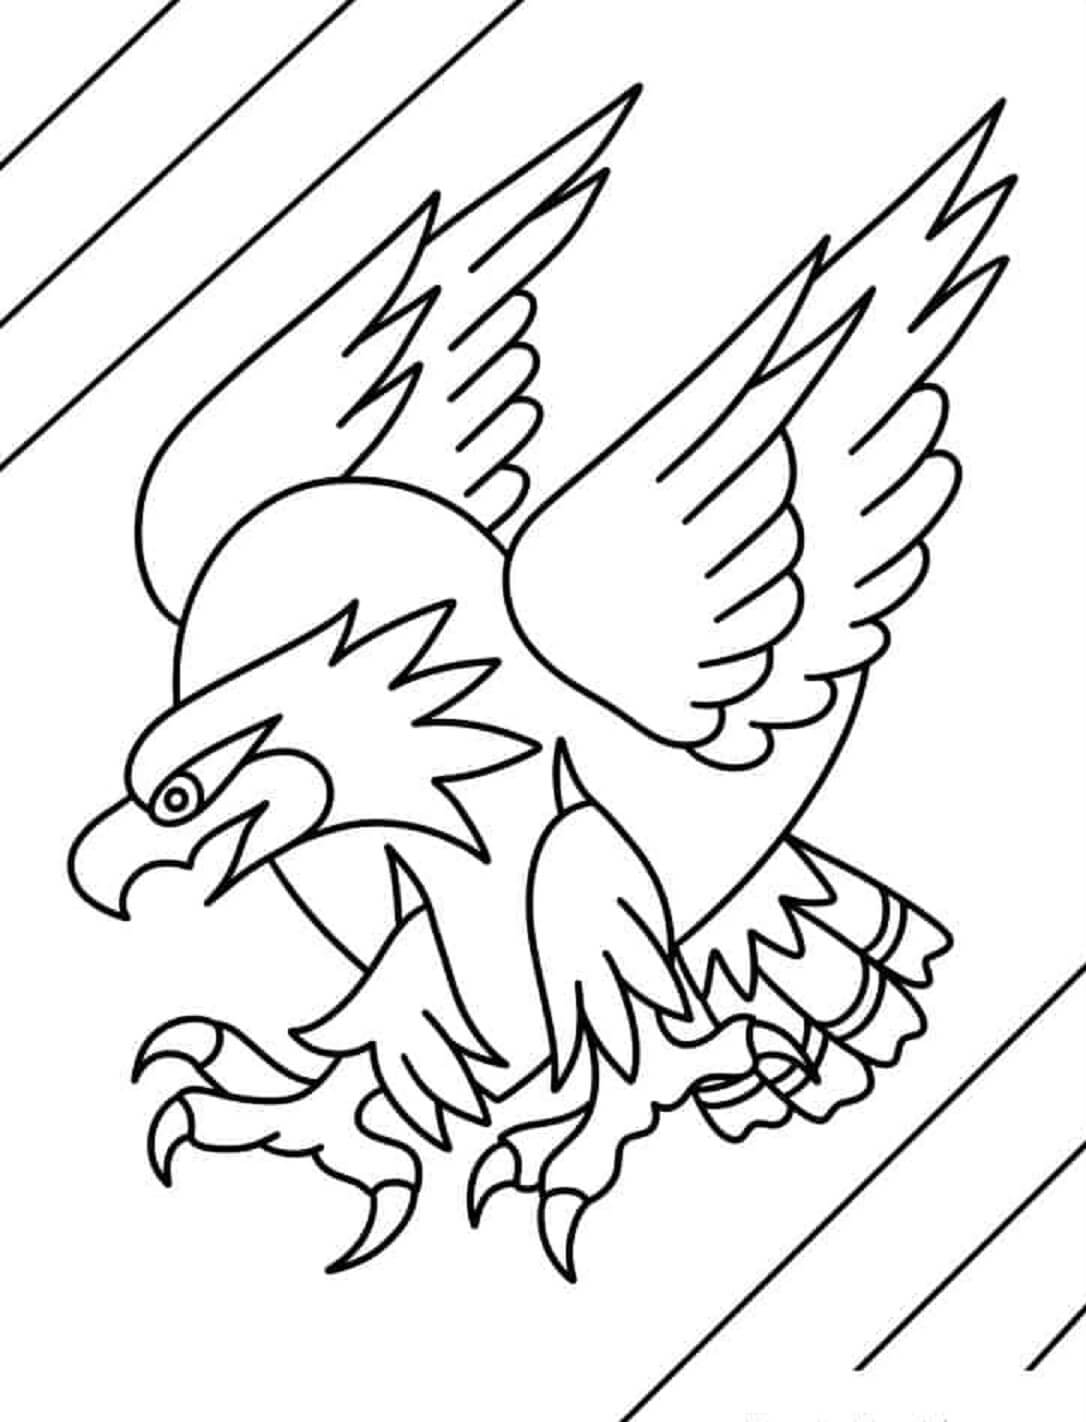 Basic eagle attack coloring page